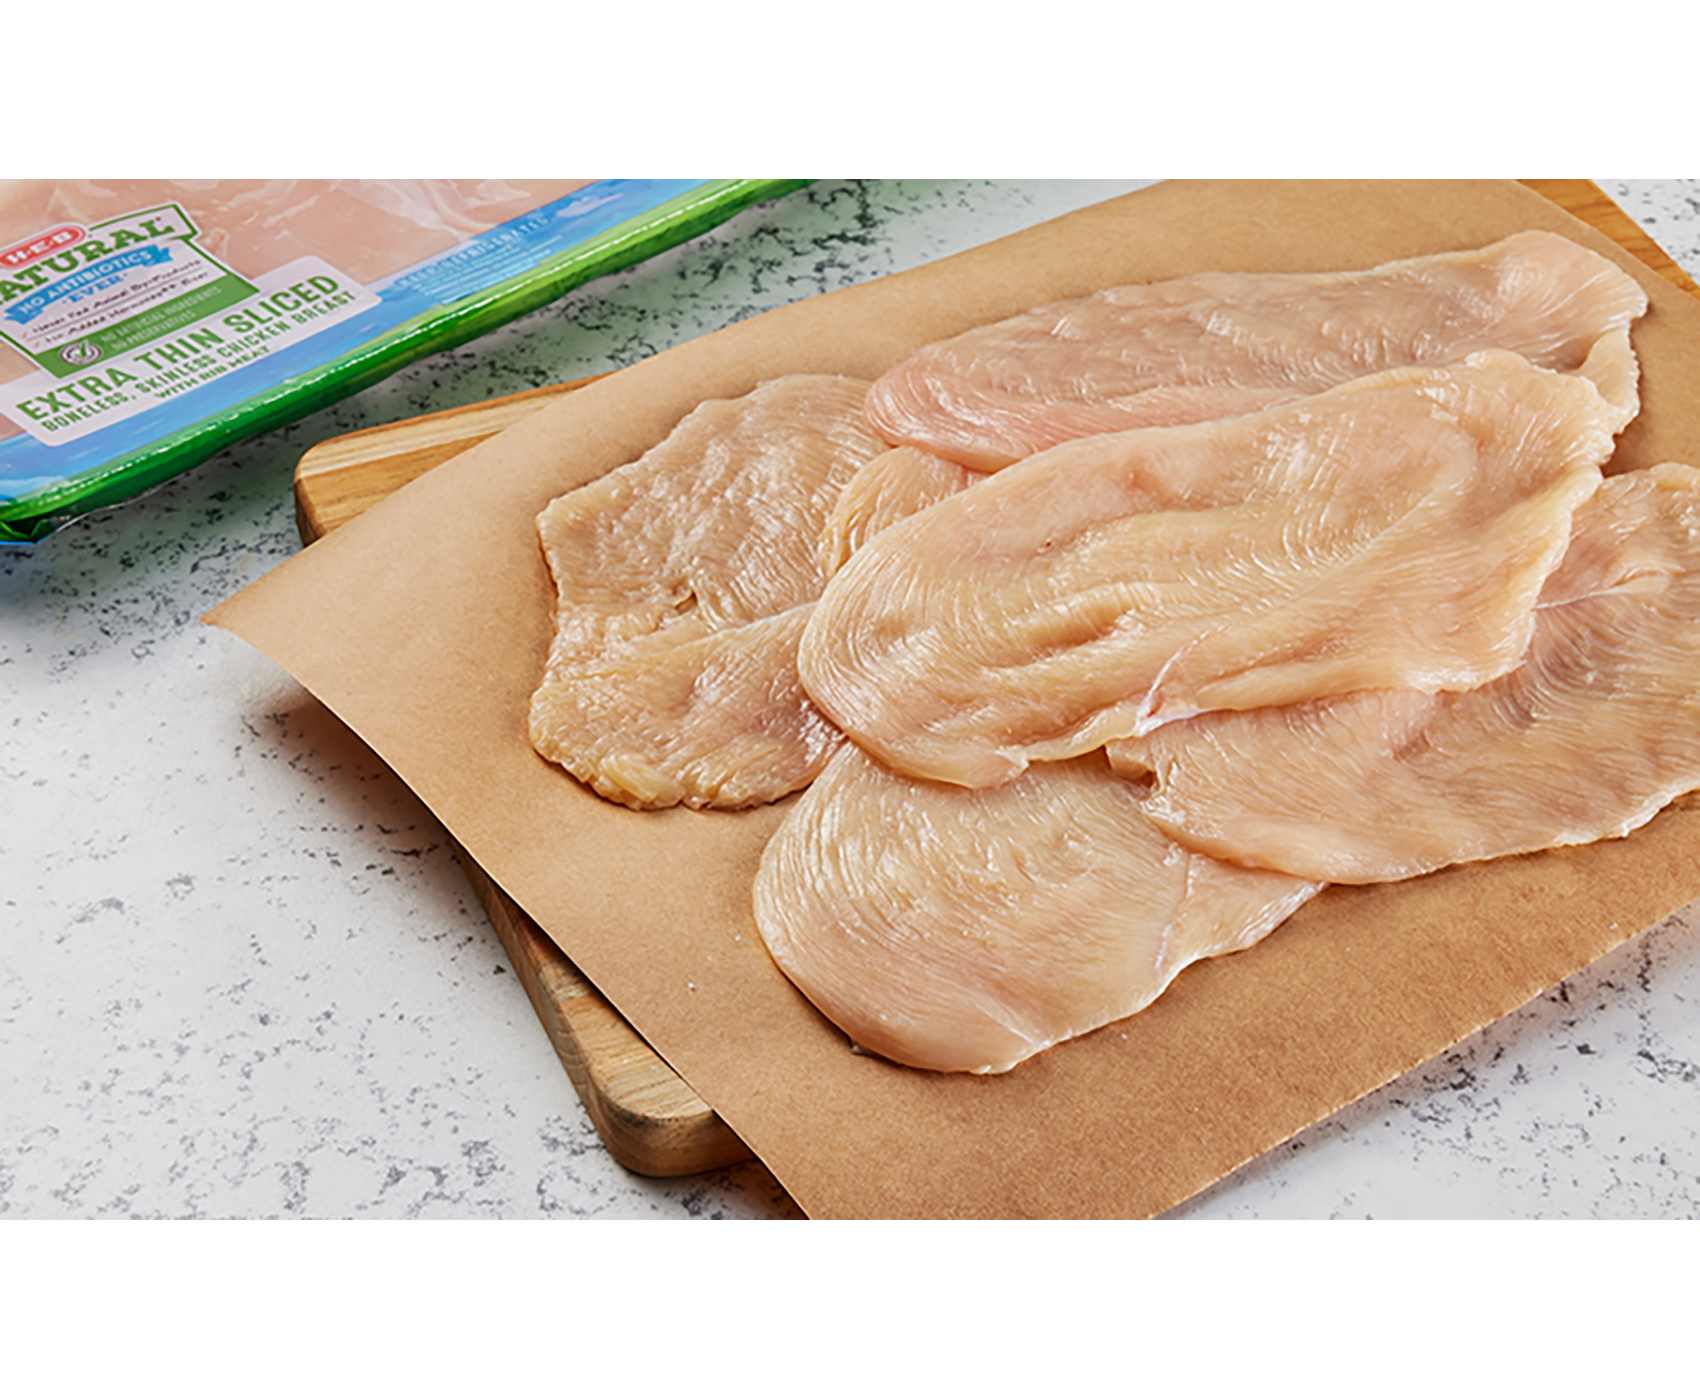 H-E-B Natural Boneless Extra Thin-Sliced Chicken Breast; image 2 of 4